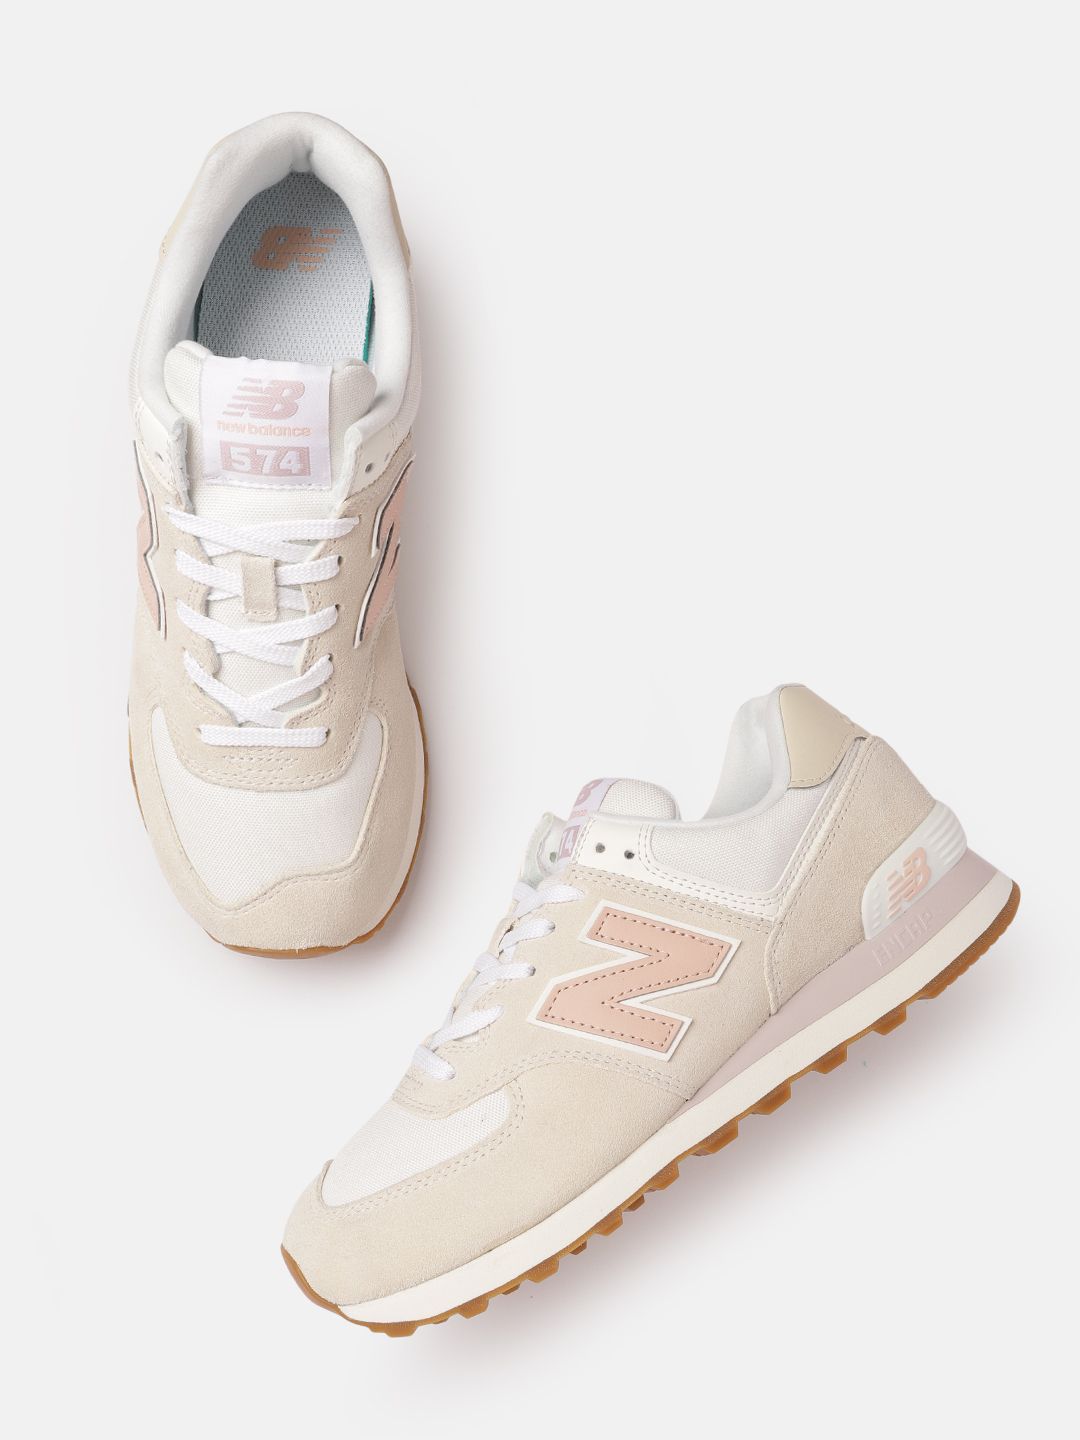 New Balance Women White & Beige Colourblocked Suede Sneakers Excluding Trims Price in India